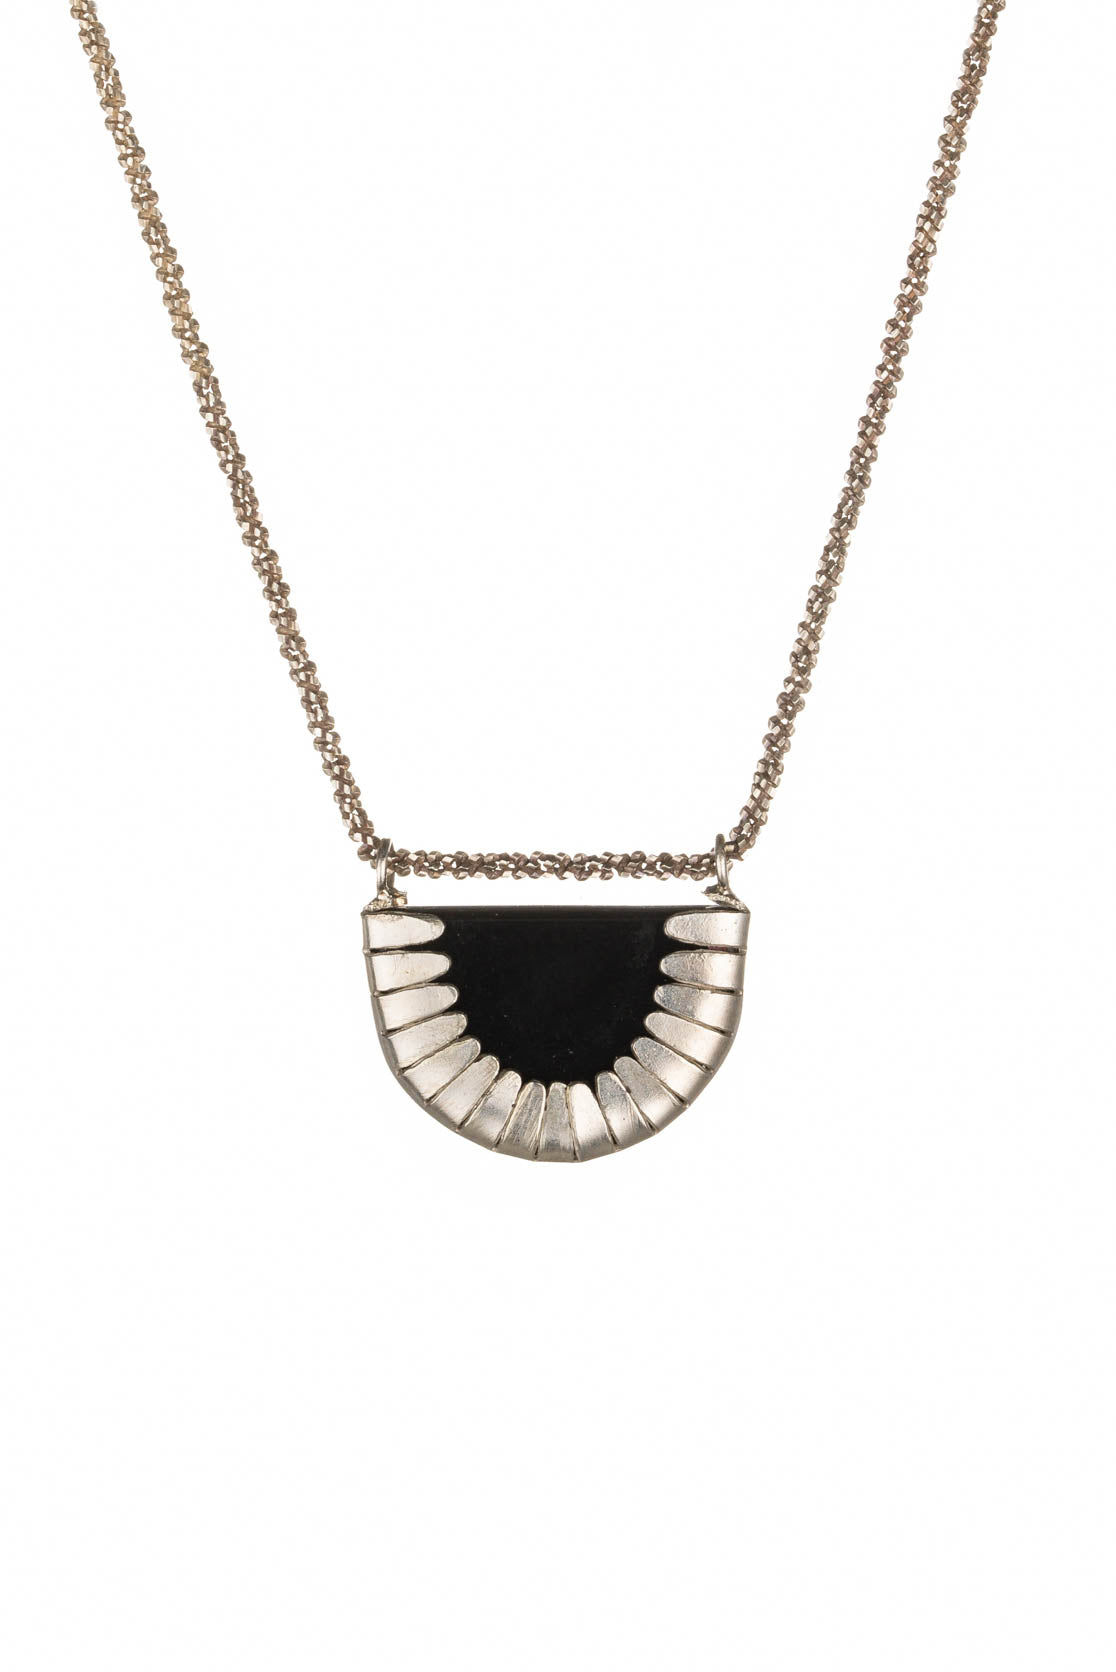 Large deco pendant made from sterling silver with black detailing